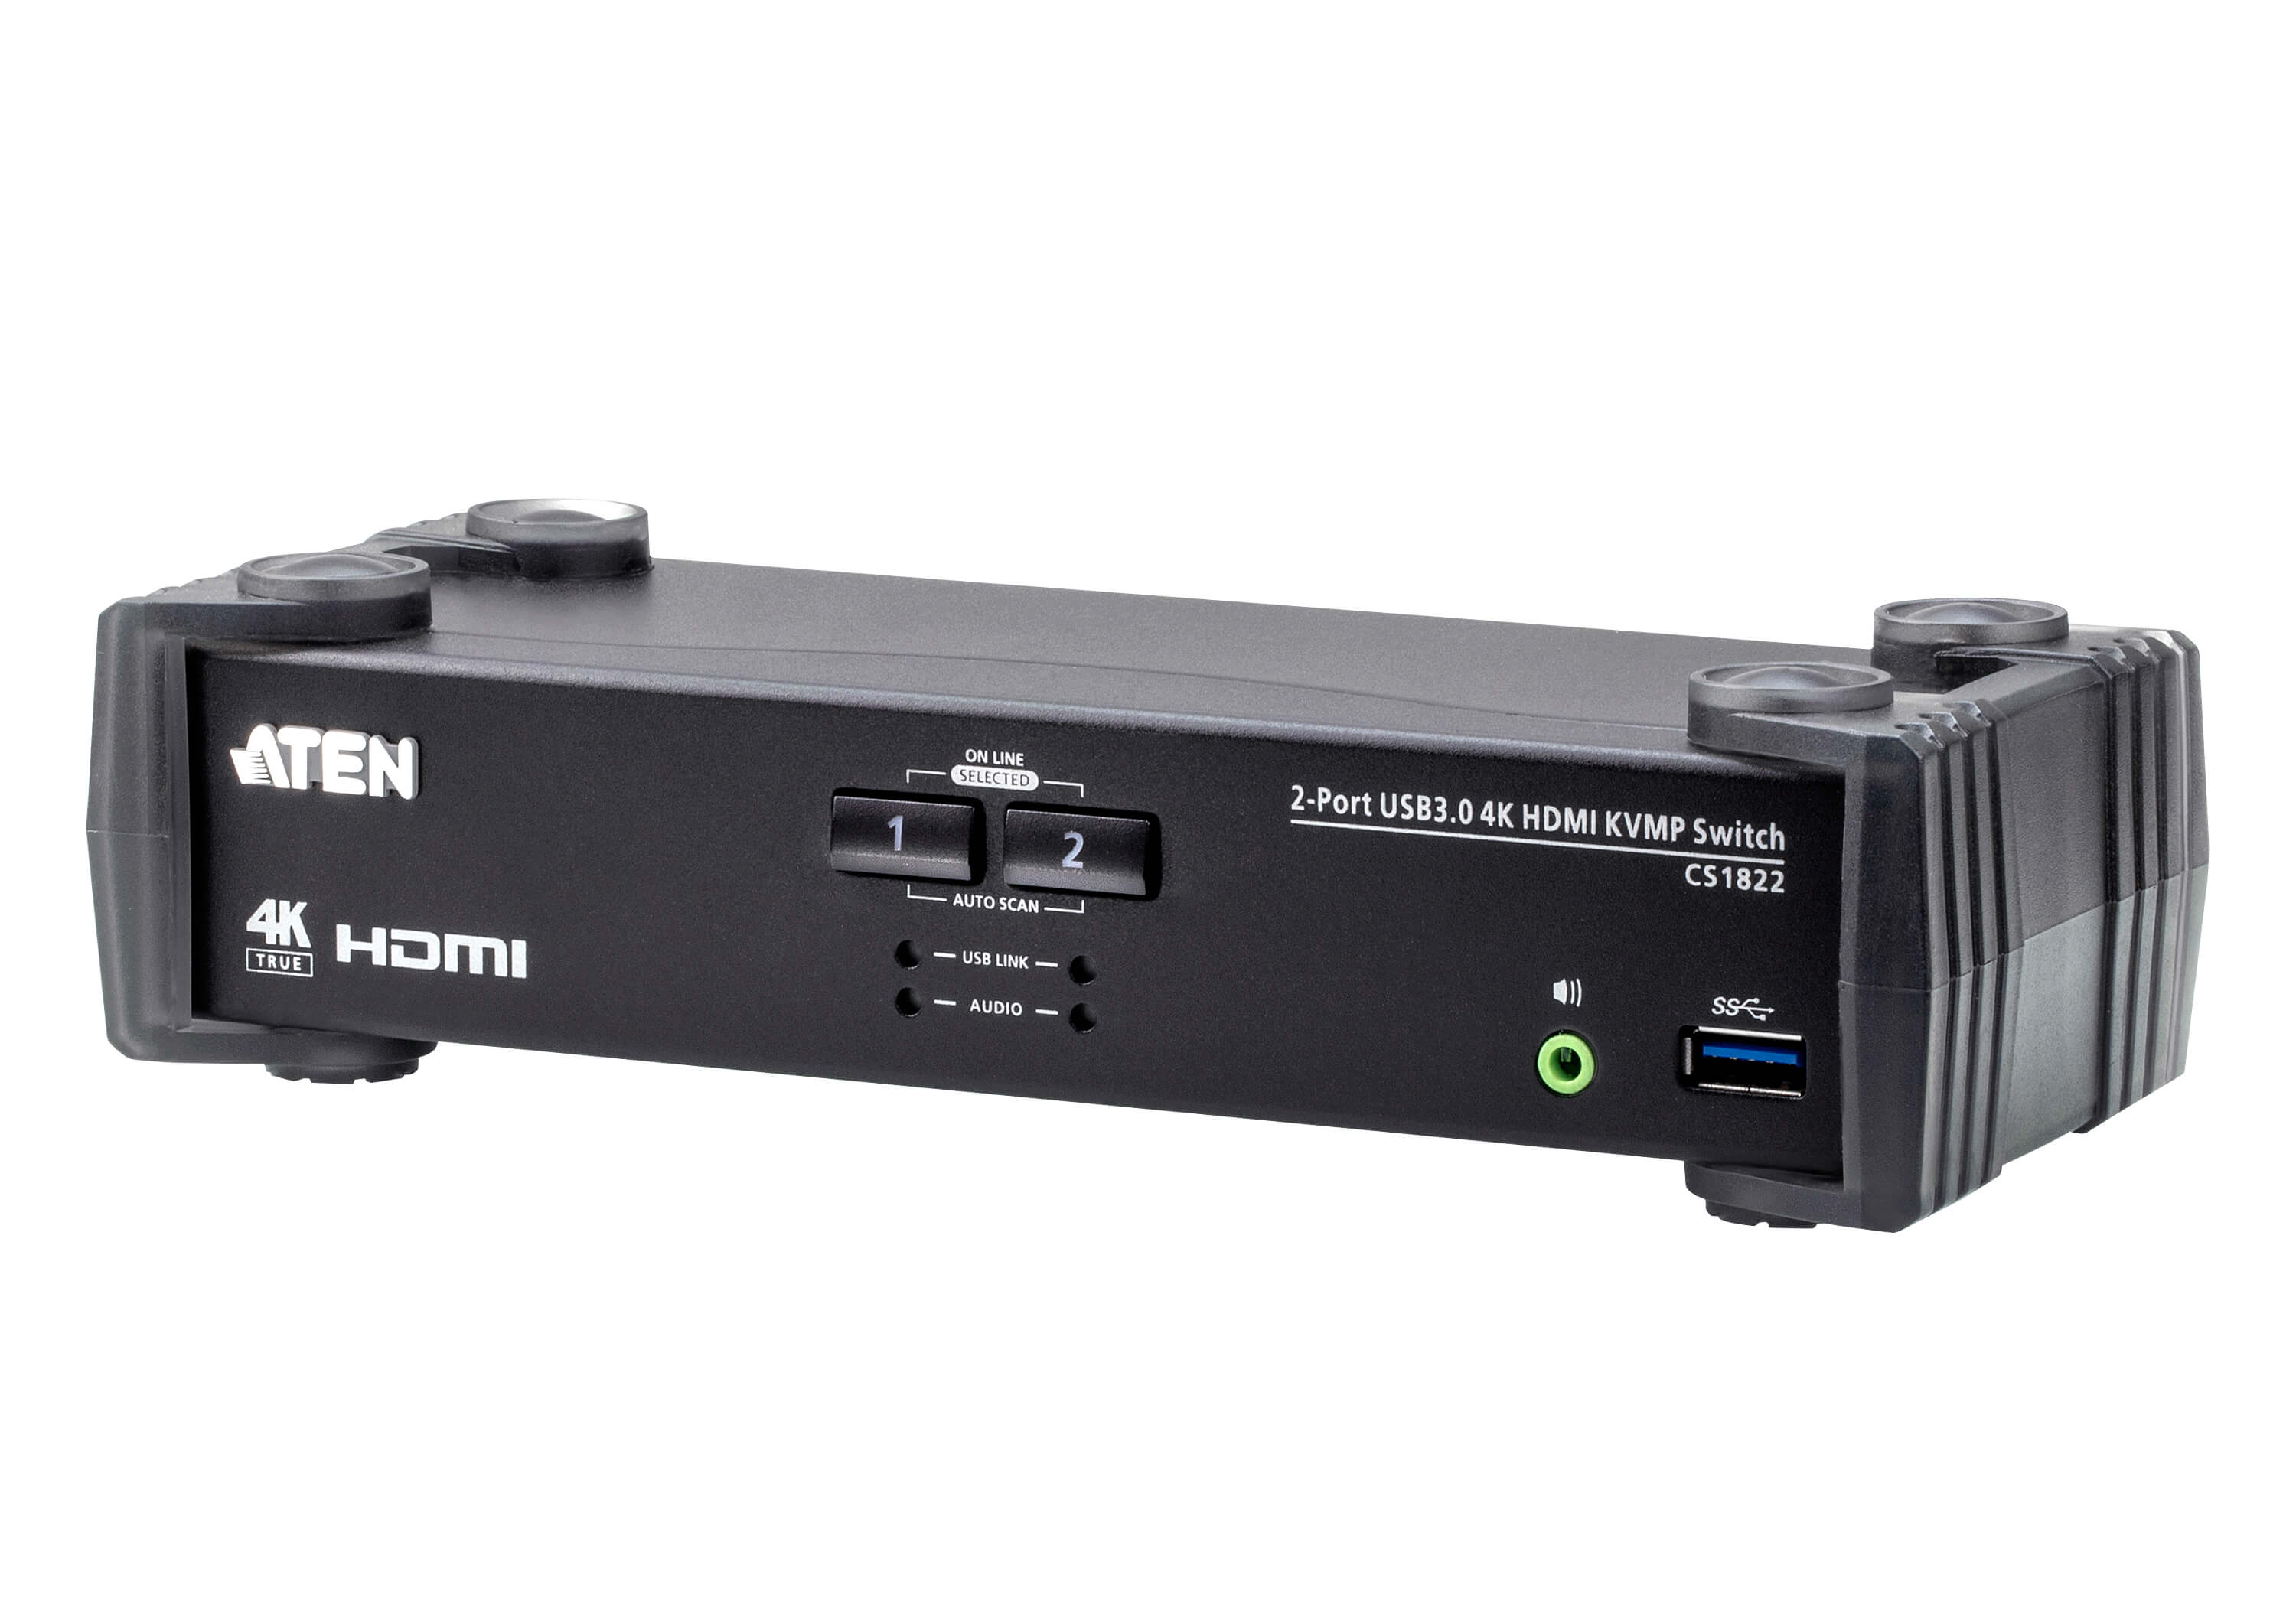 Aten Desktop KVMP Switch 2 Port Single Display 4k HDMI w/ audio mixer mode, Cables Included, Selection Via Front Panel